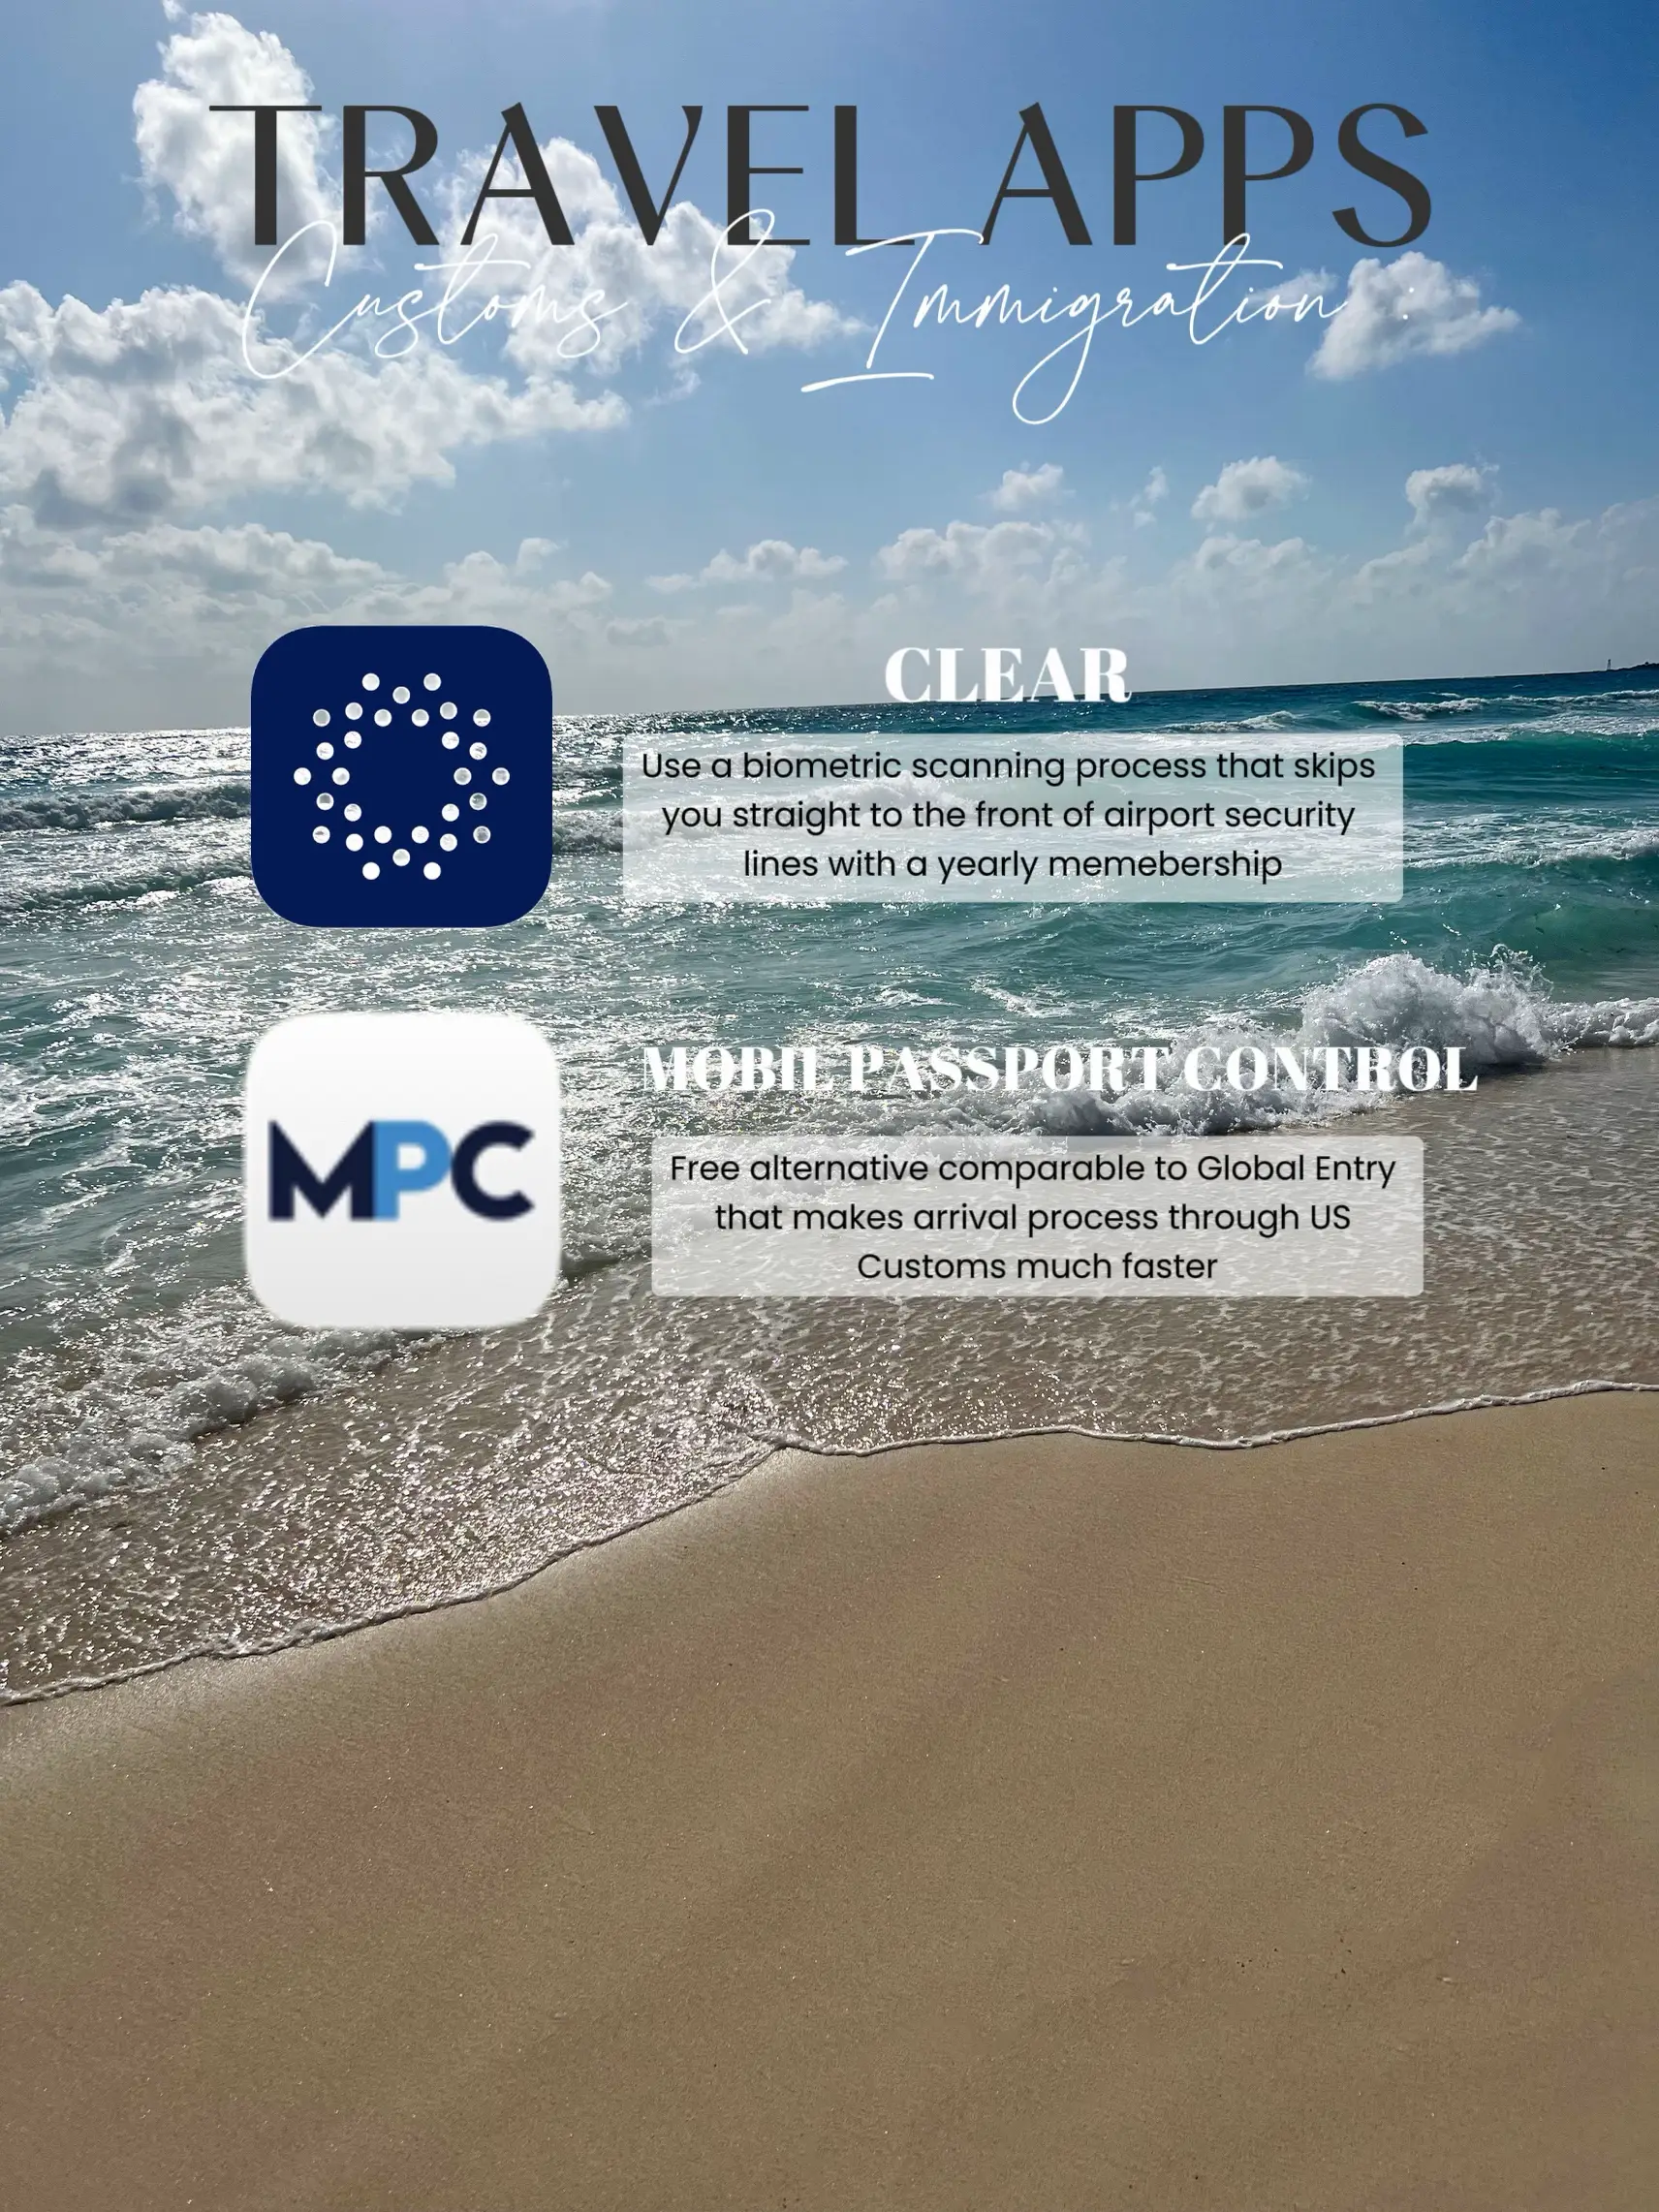  A screen showing a beach with the words "Clear" and "Mobil